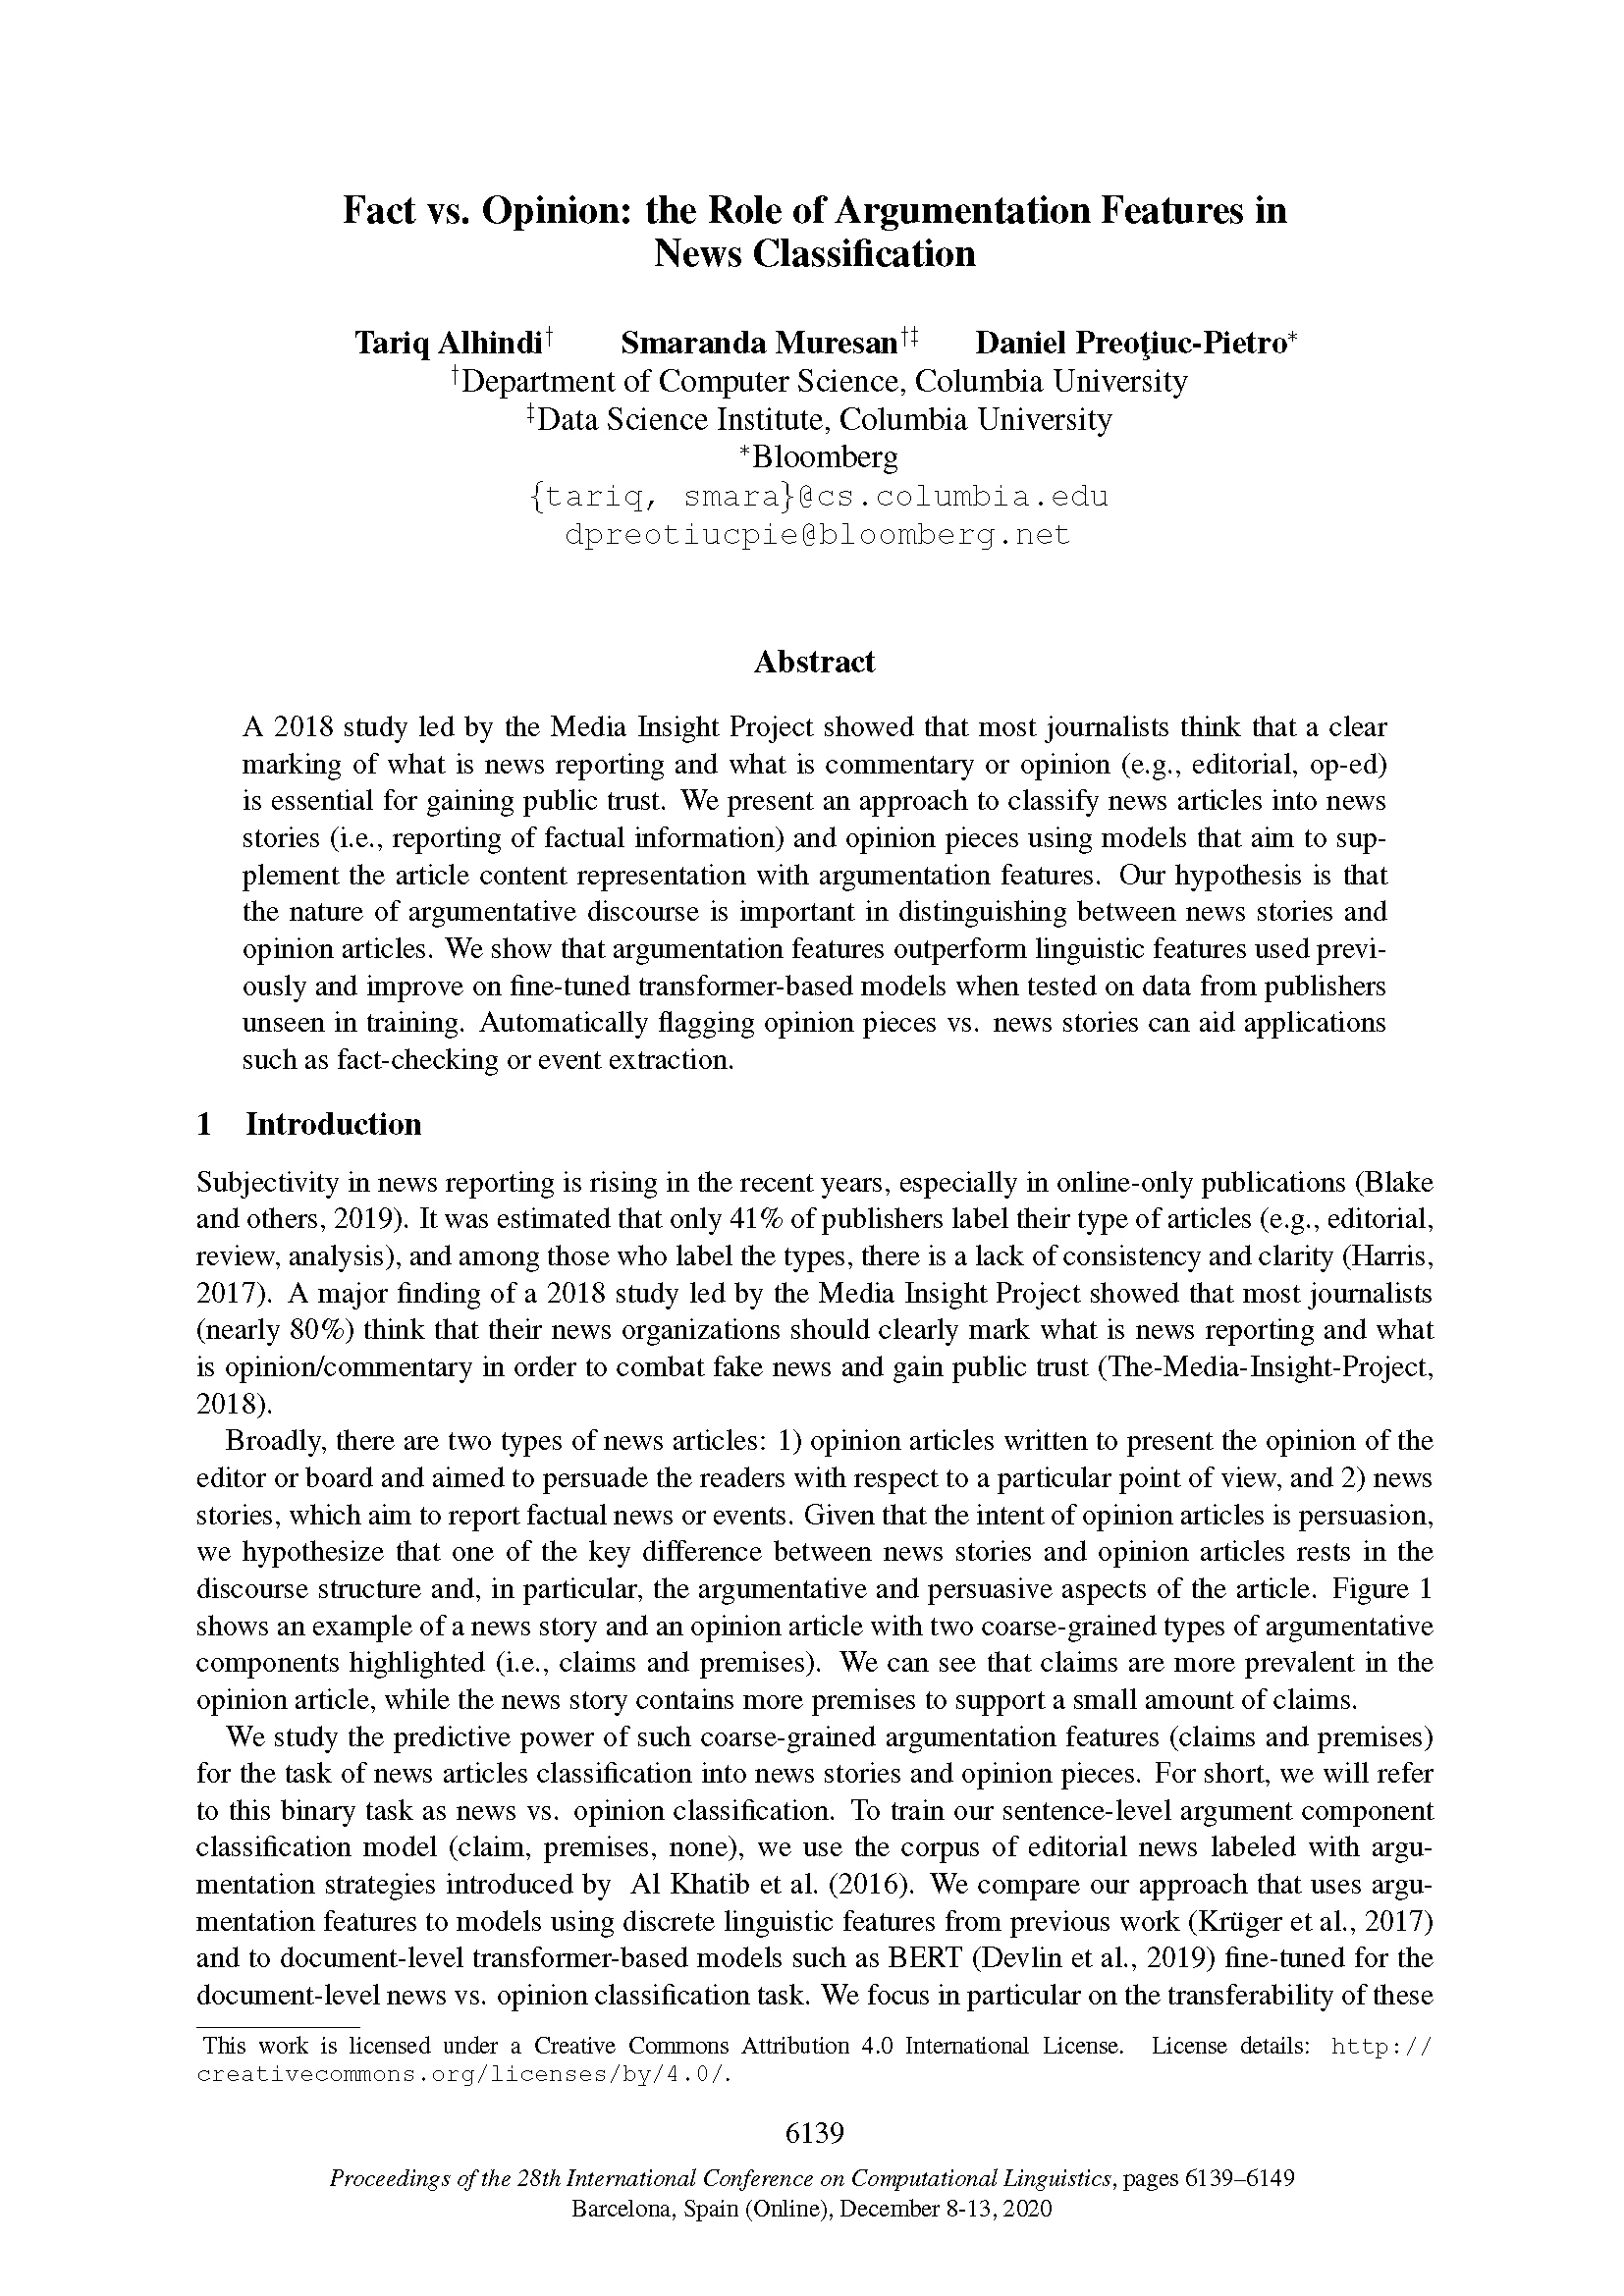 First page of “Fact vs. Opinion: The Role of Argumentative Features in News Classification”